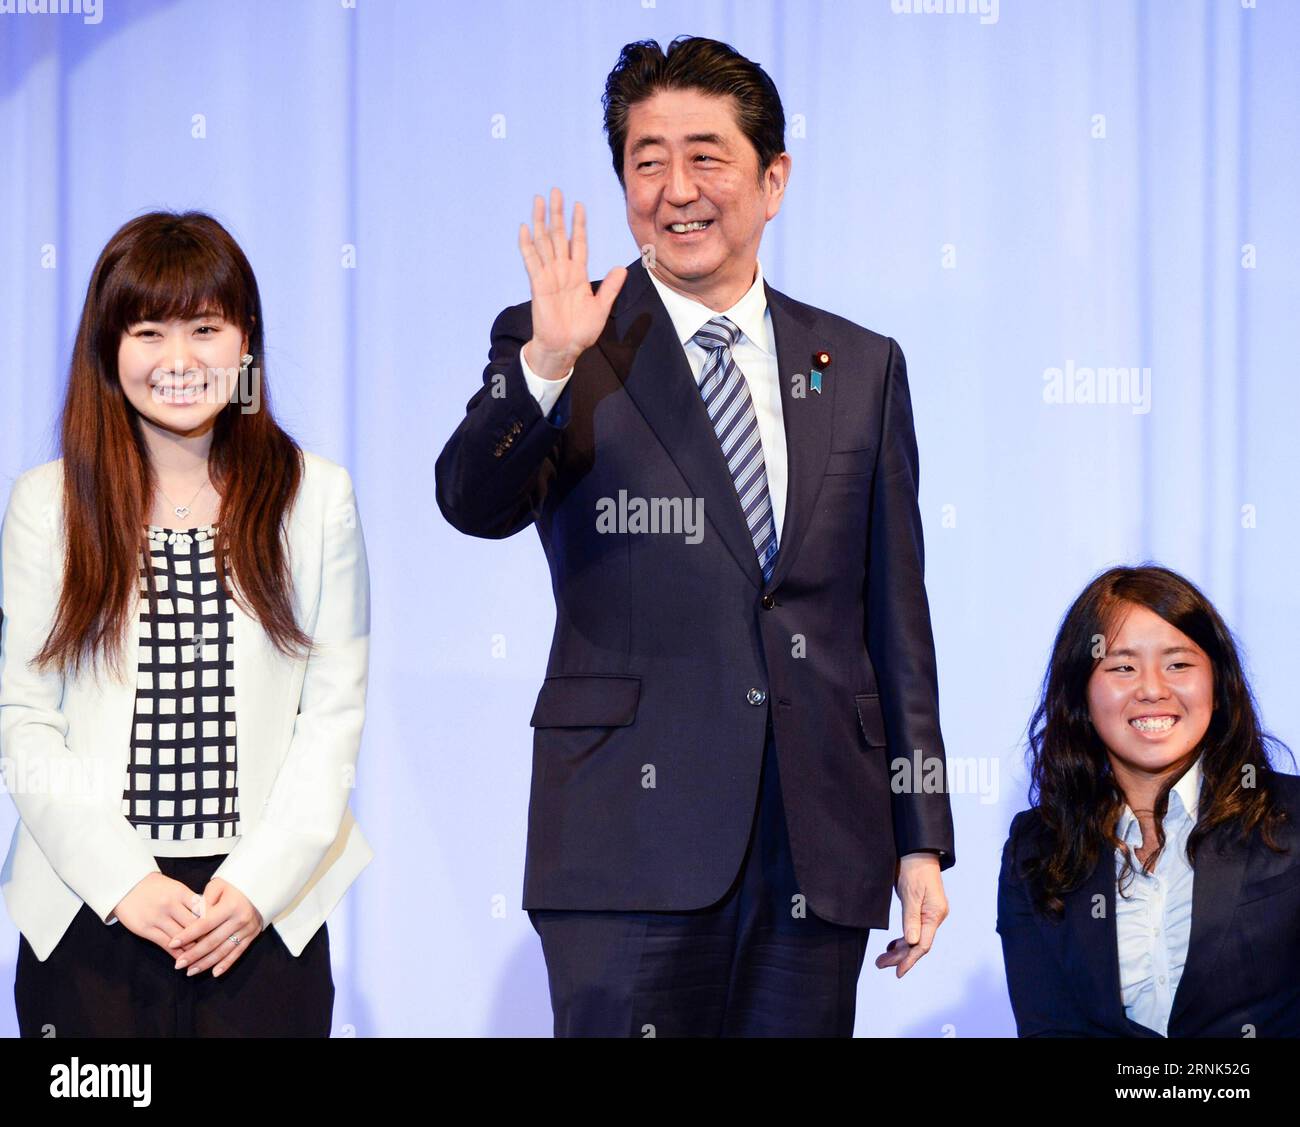 (170305) -- TOKYO, March 5, 2017 -- Japanese Prime Minister Shinzo Abe (C) pose with Japanese athletes during the 84th congress of Japan s ruling Liberal Democratic Party in Tokyo, Japan, March 5, 2017. Japan s ruling Liberal Democratic Party extended on Sunday the party president s maximum tenure from two consecutive three-year terms to three consecutive terms, paving the way for an extended Abe administration till 2021. ) (zw) JAPAN-TOKYO-LDP-CONGRESS MaxPing PUBLICATIONxNOTxINxCHN   Tokyo March 5 2017 Japanese Prime Ministers Shinzo ABE C Pose With Japanese Athletes during The 84th Congress Stock Photo